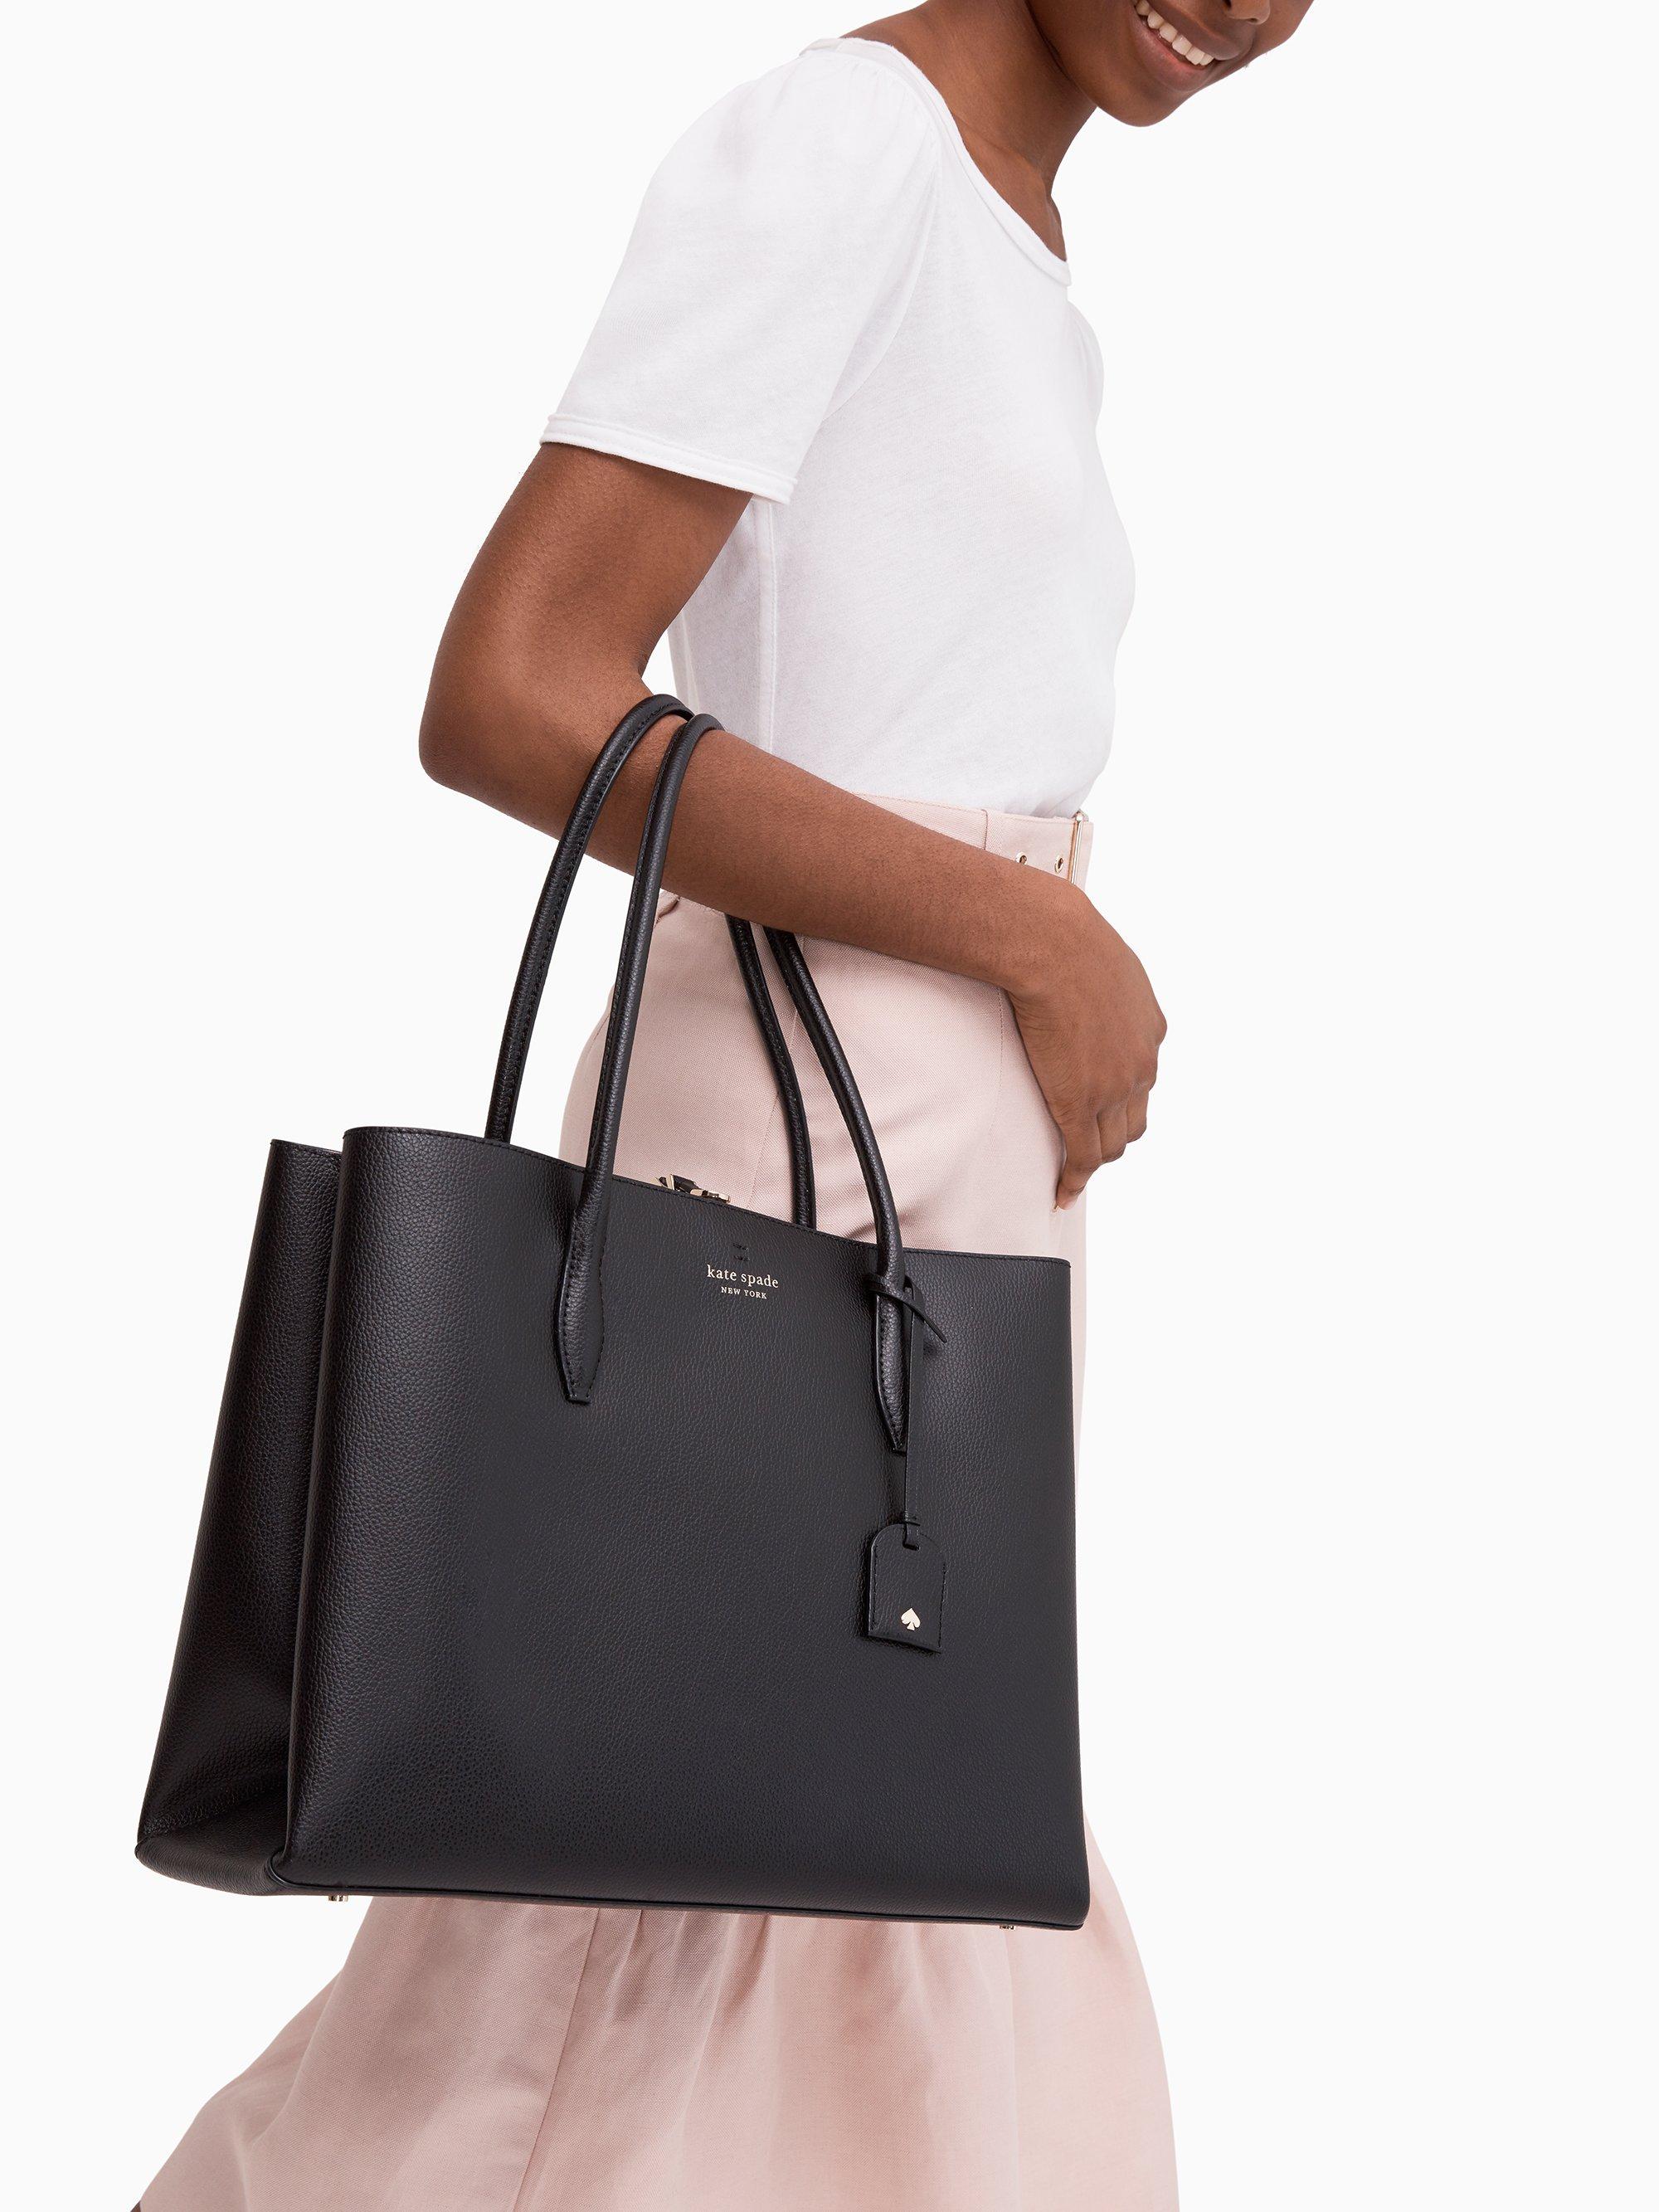 Kate Spade Leather Eva Large Tote in Black - Lyst